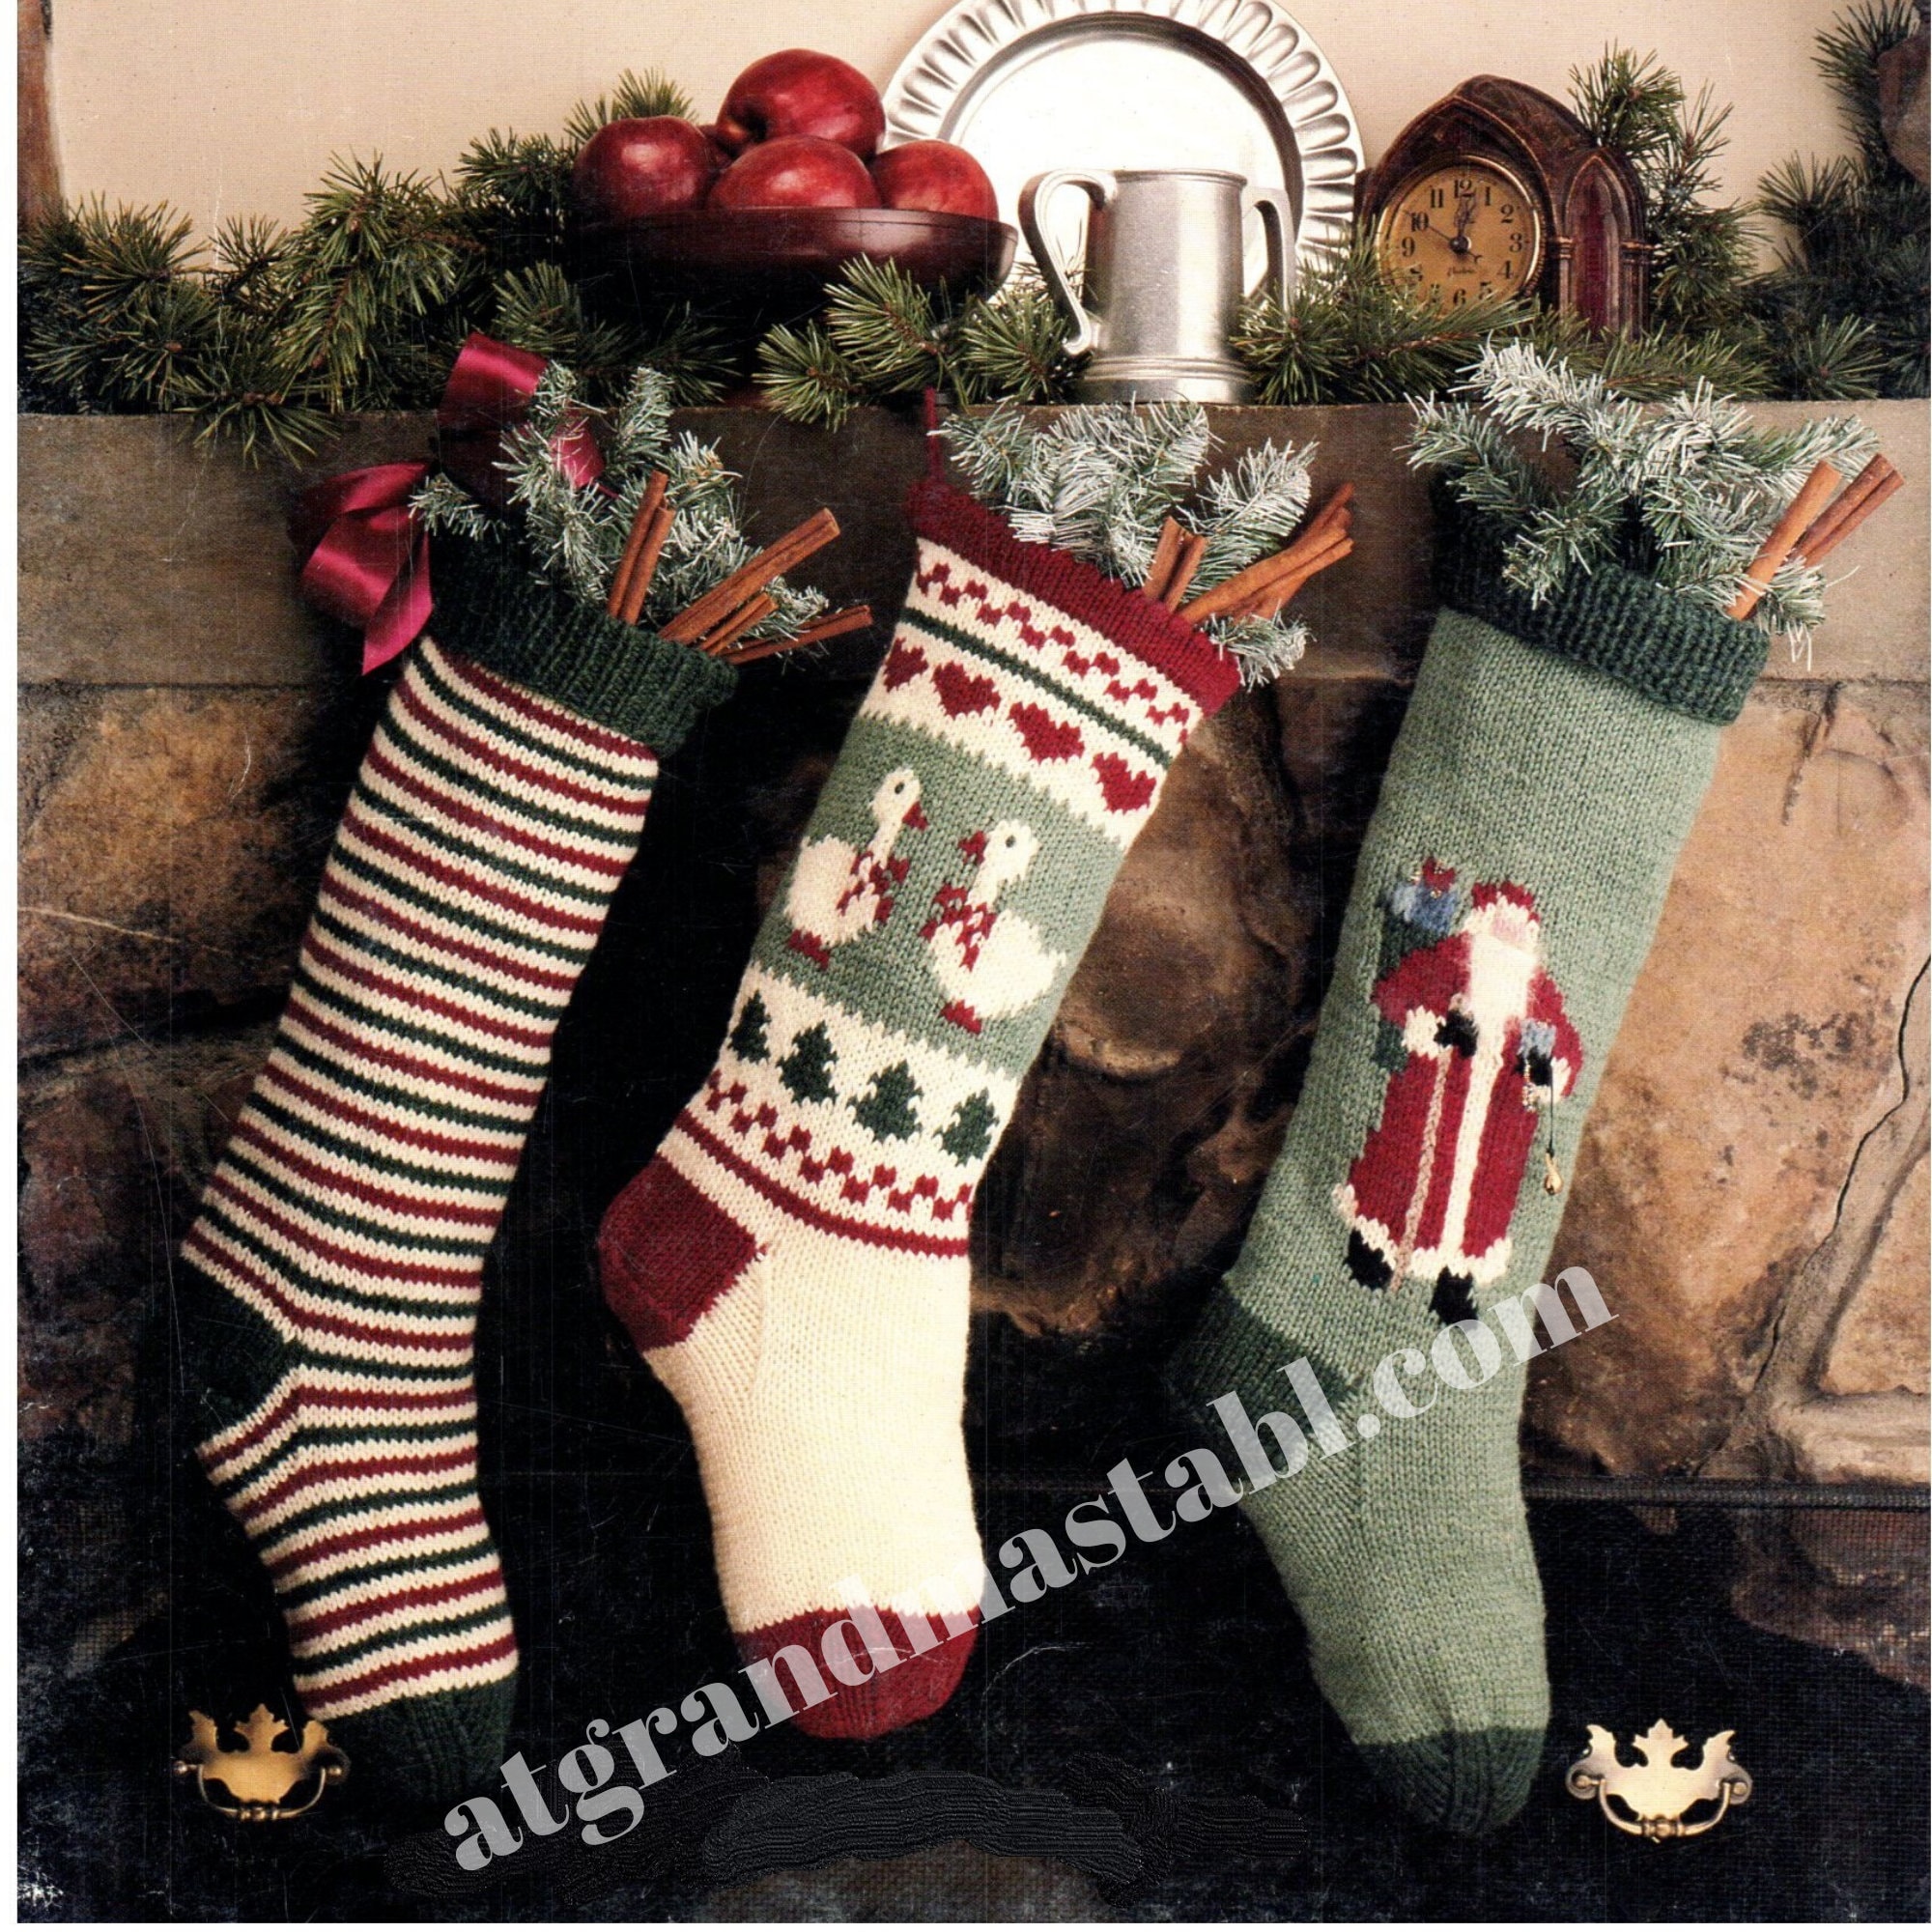 Vintage Knit Christmas Stocking Pattern Santa Claus Geese Striped Knitted  Stockings Stitch Needle Craft Download PDF Instructions Pattern 